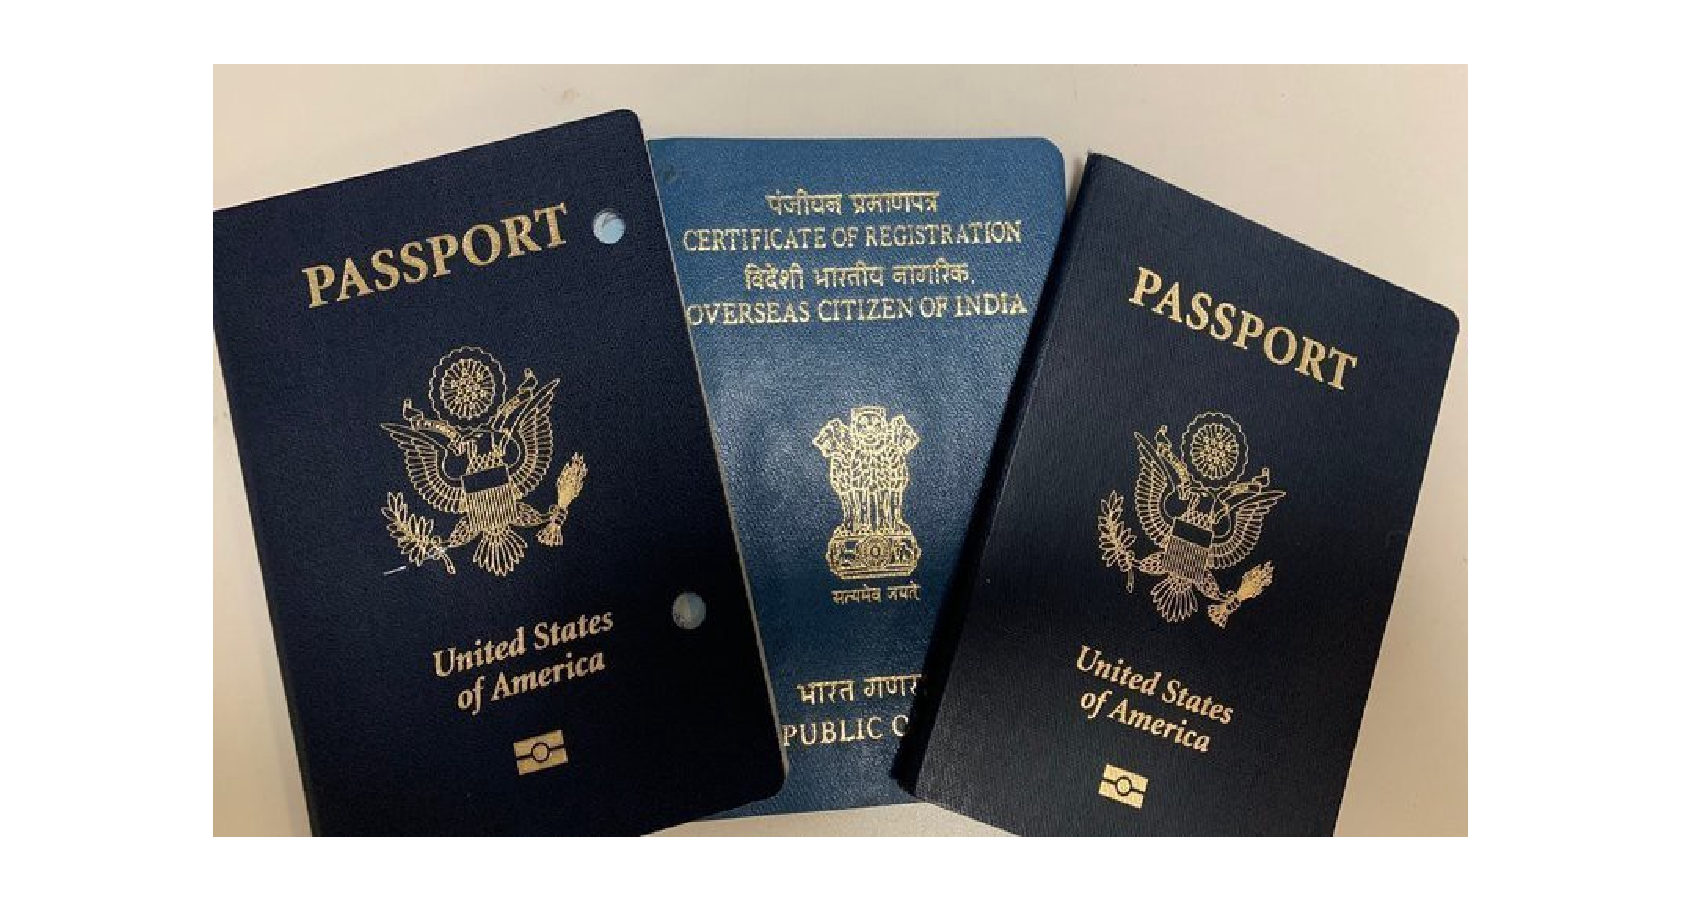 OCI Cardholders Should Carry Both Old and New Passports, Though Not Required